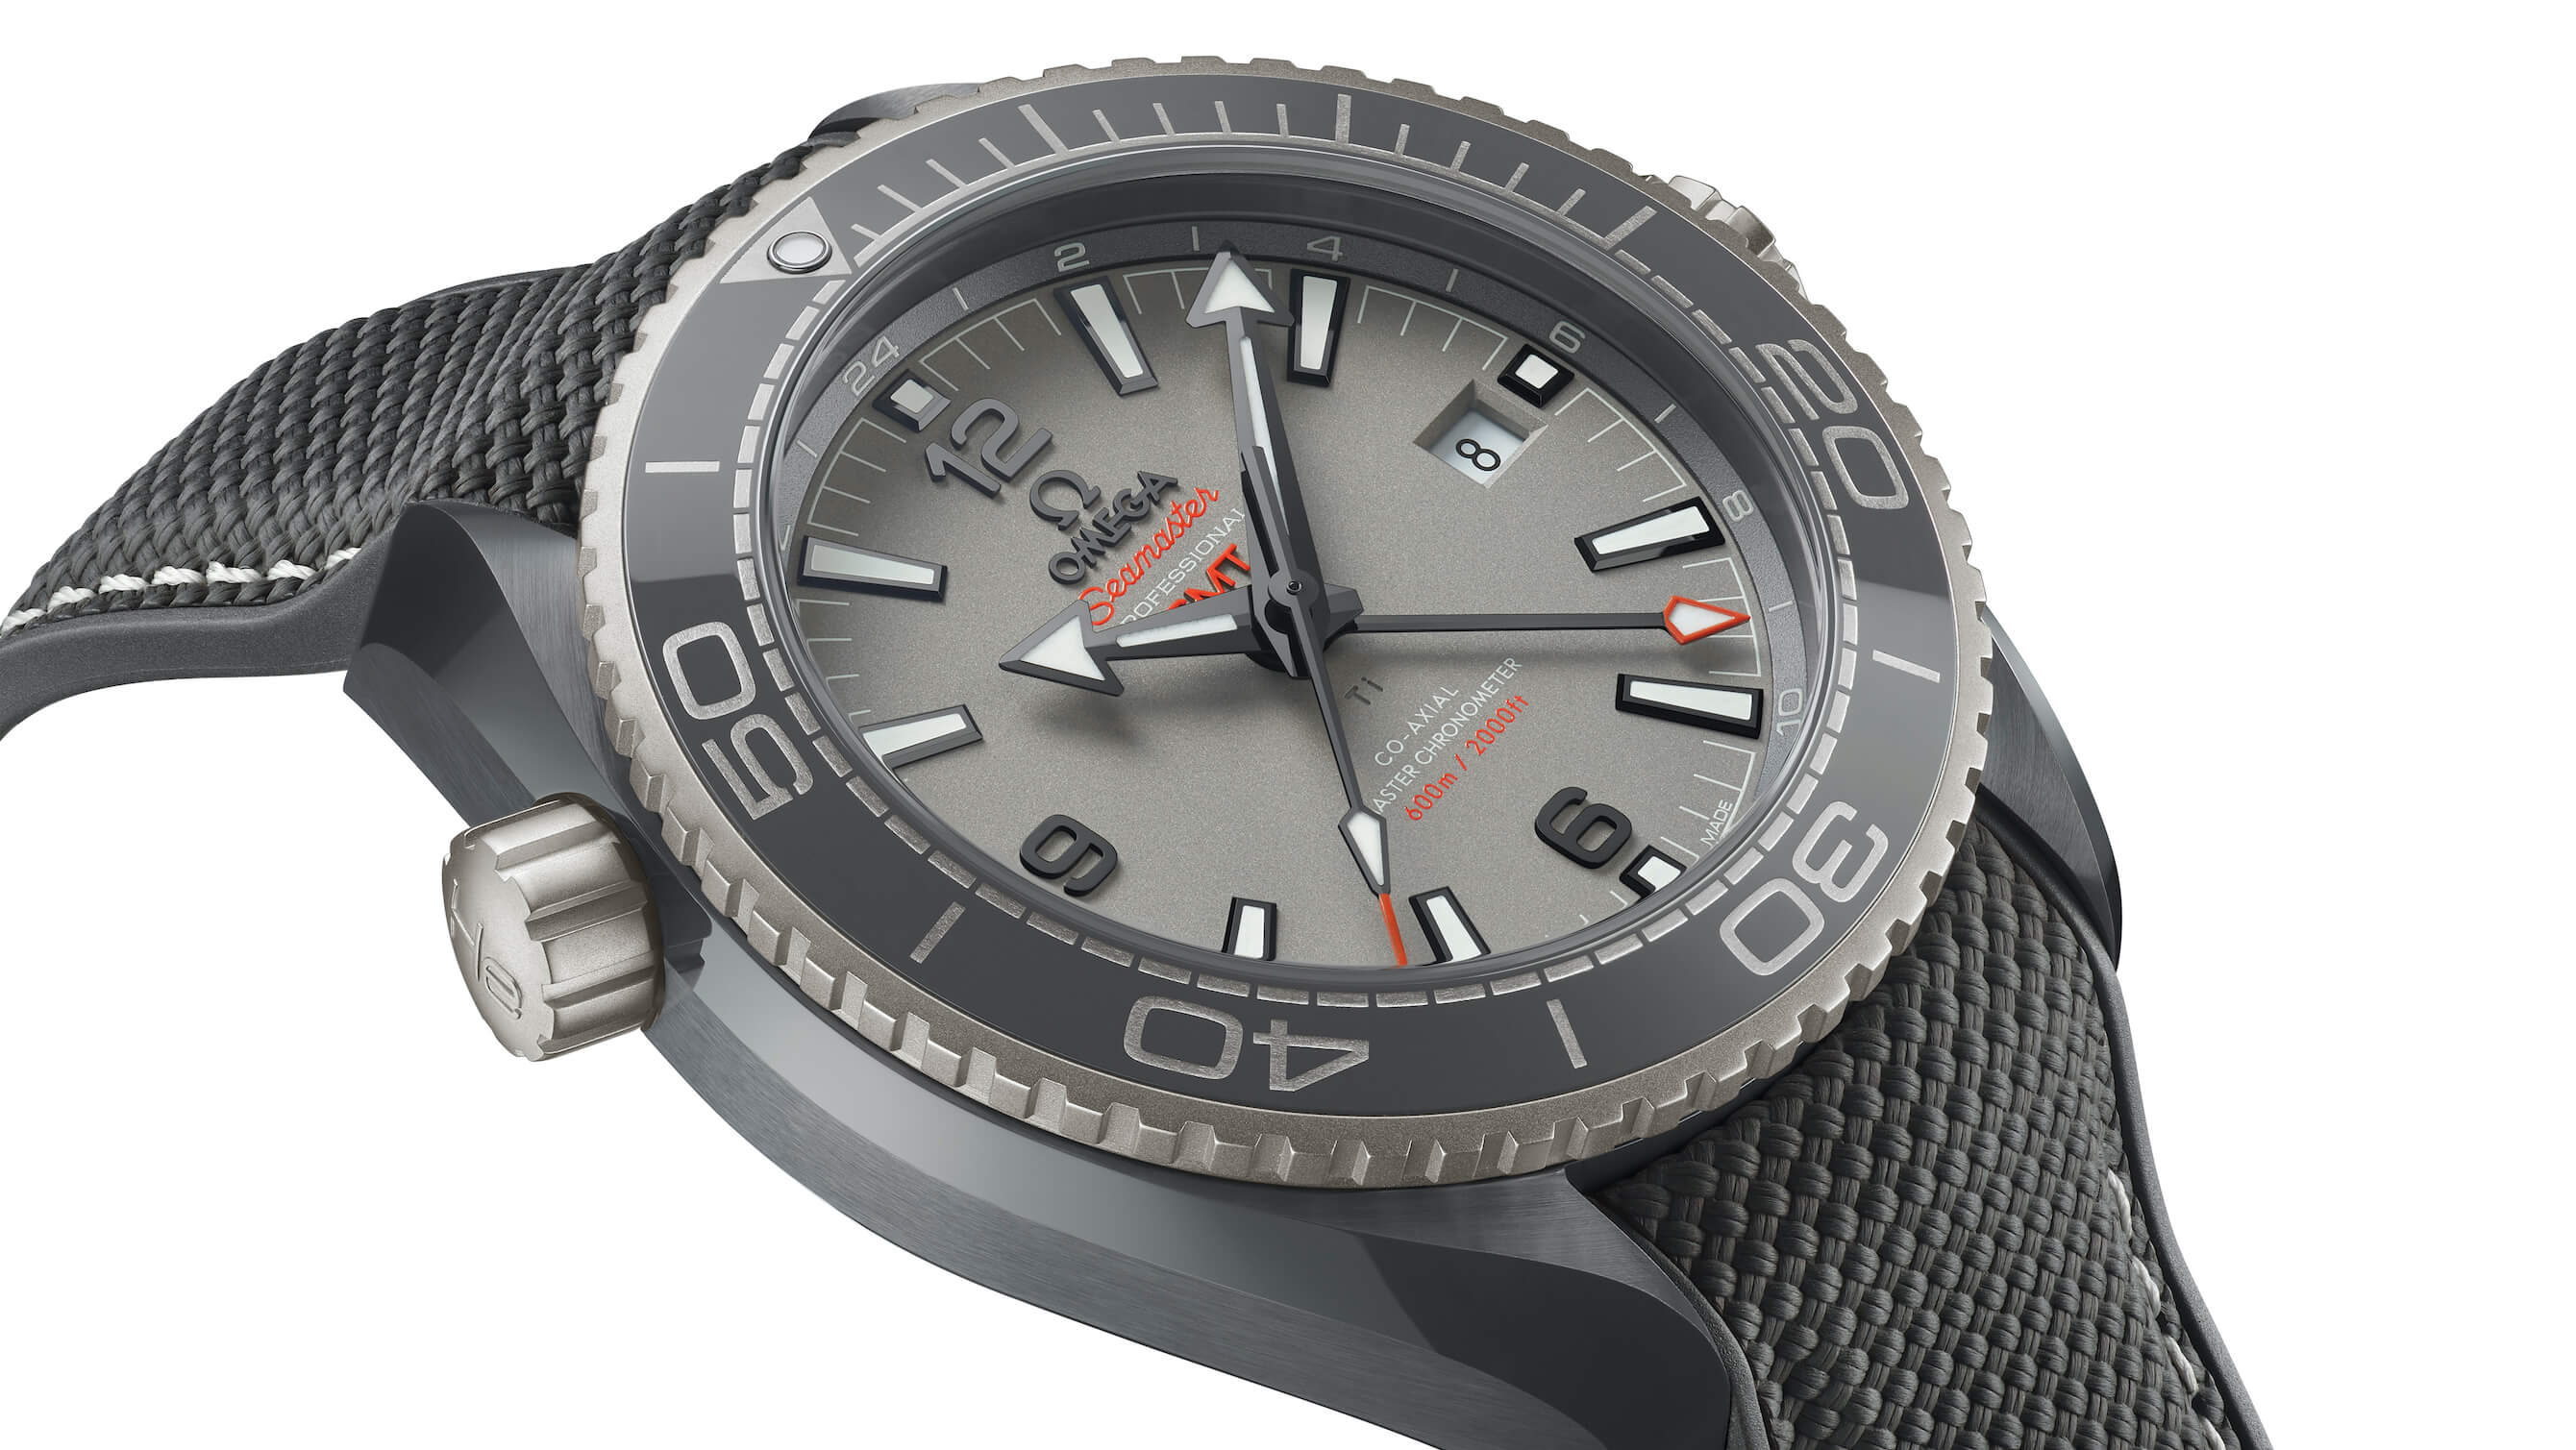 The new Omega Seamaster Planet Ocean Dark Grey removes weight, but does it add value?